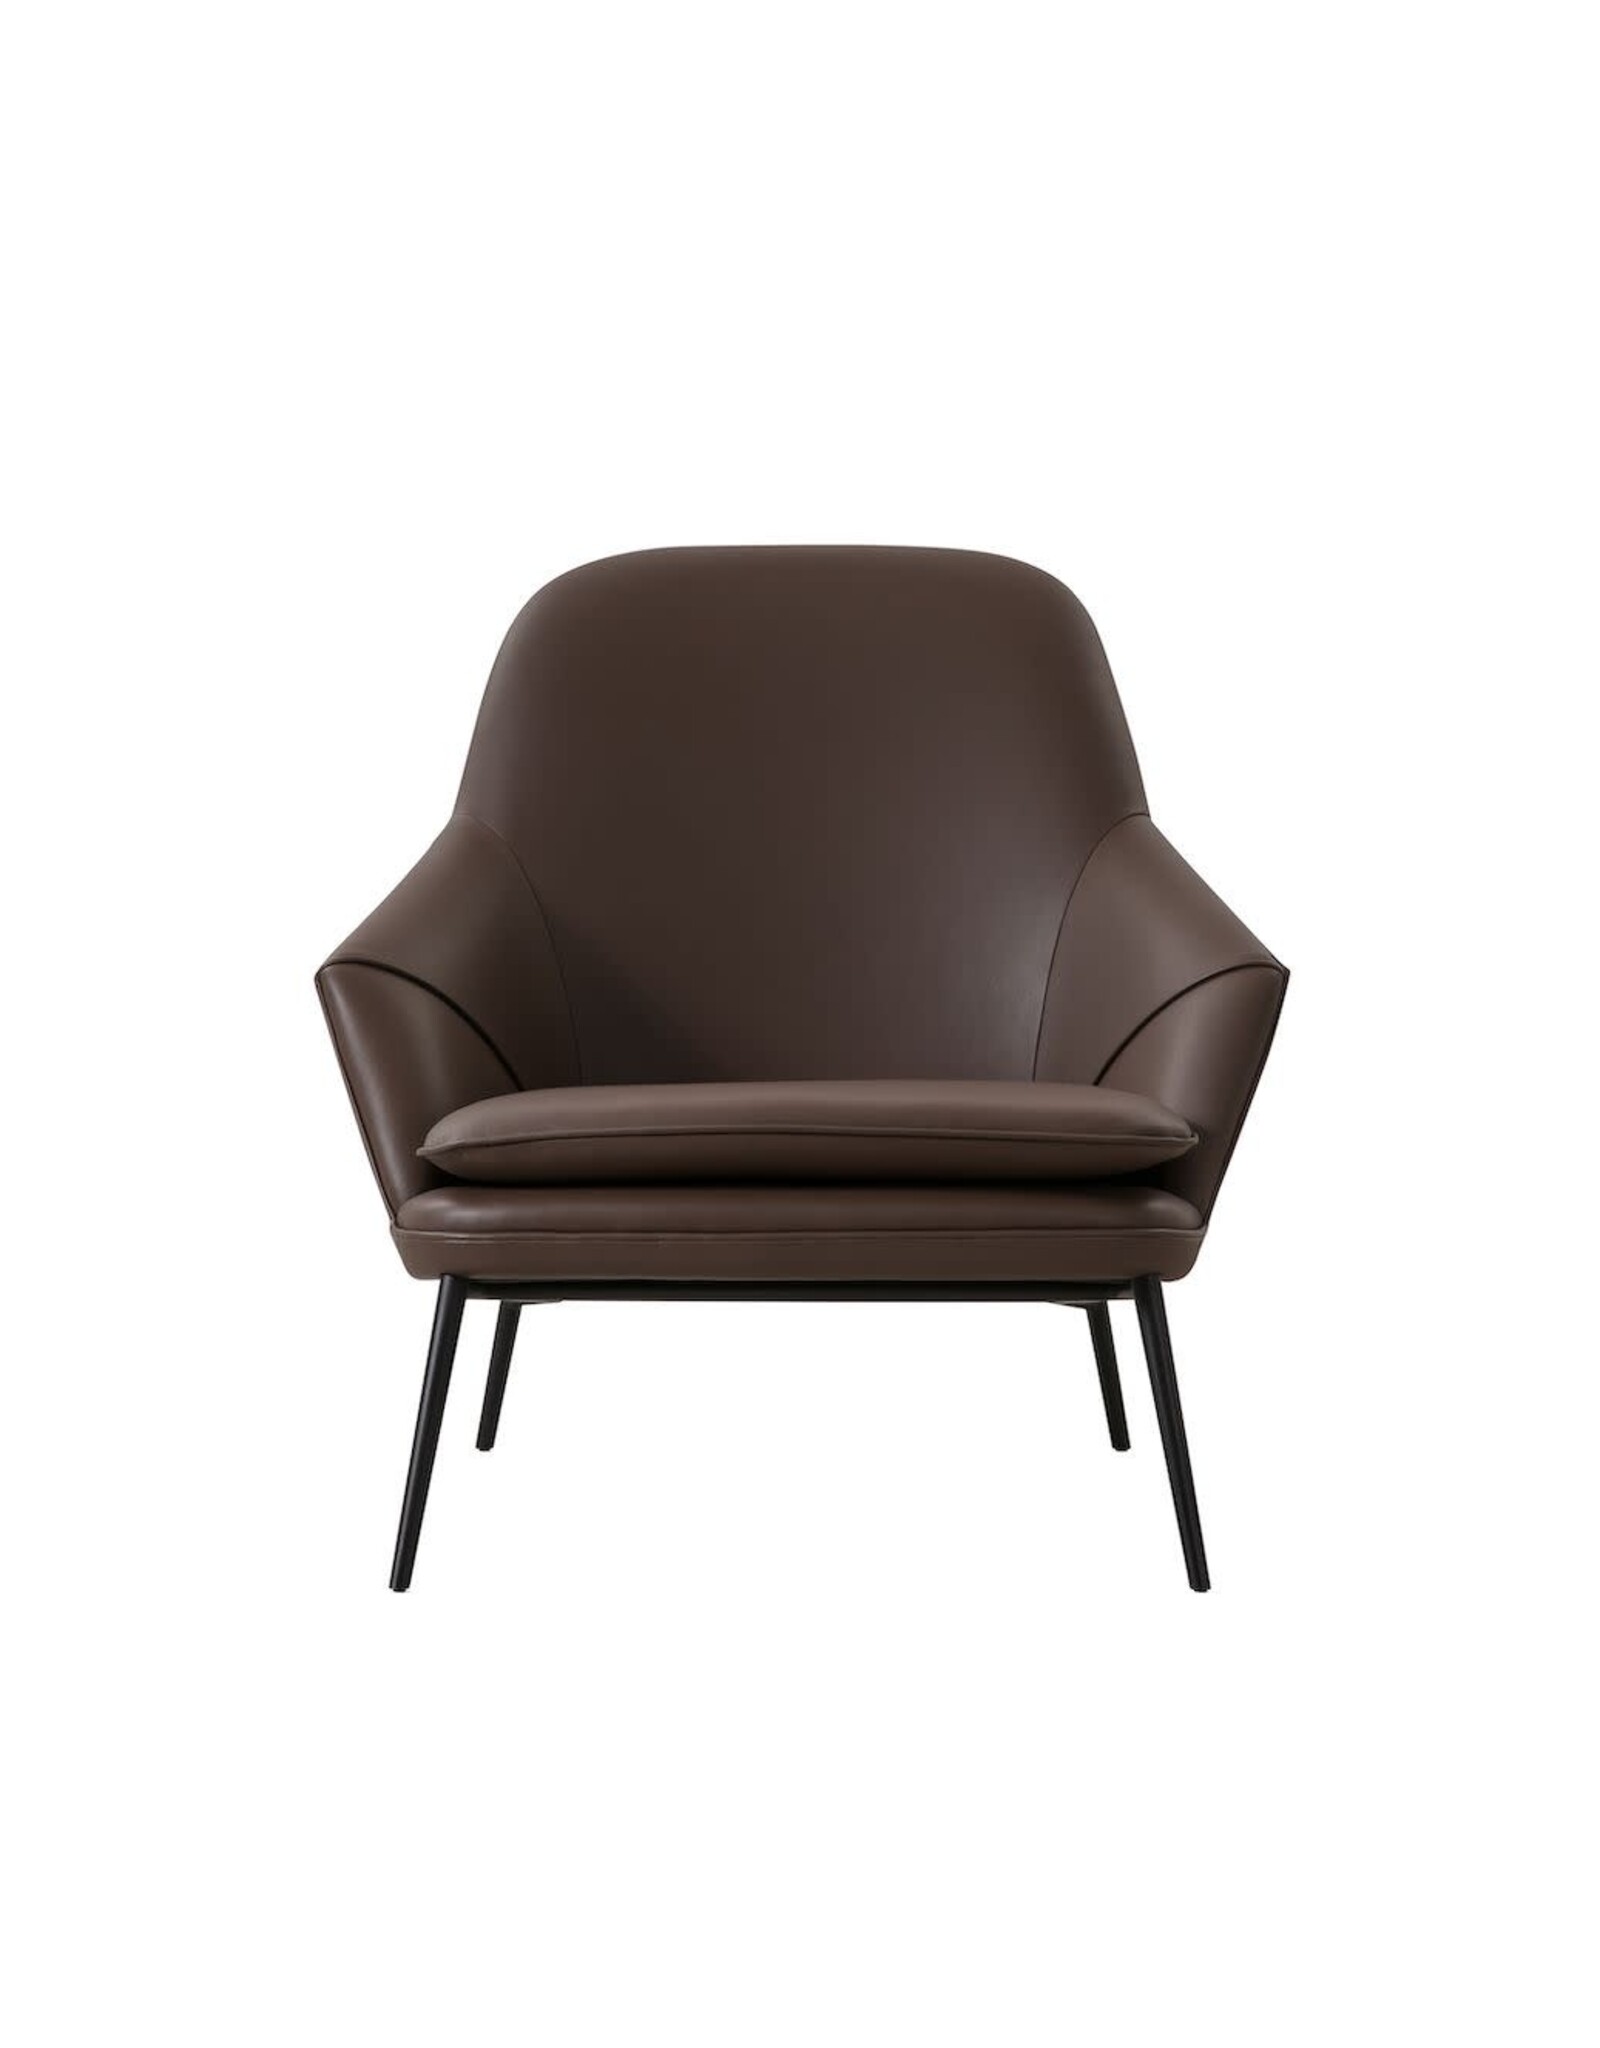 HUG LOUNGE CHAIR IN COGNAC LEATHER